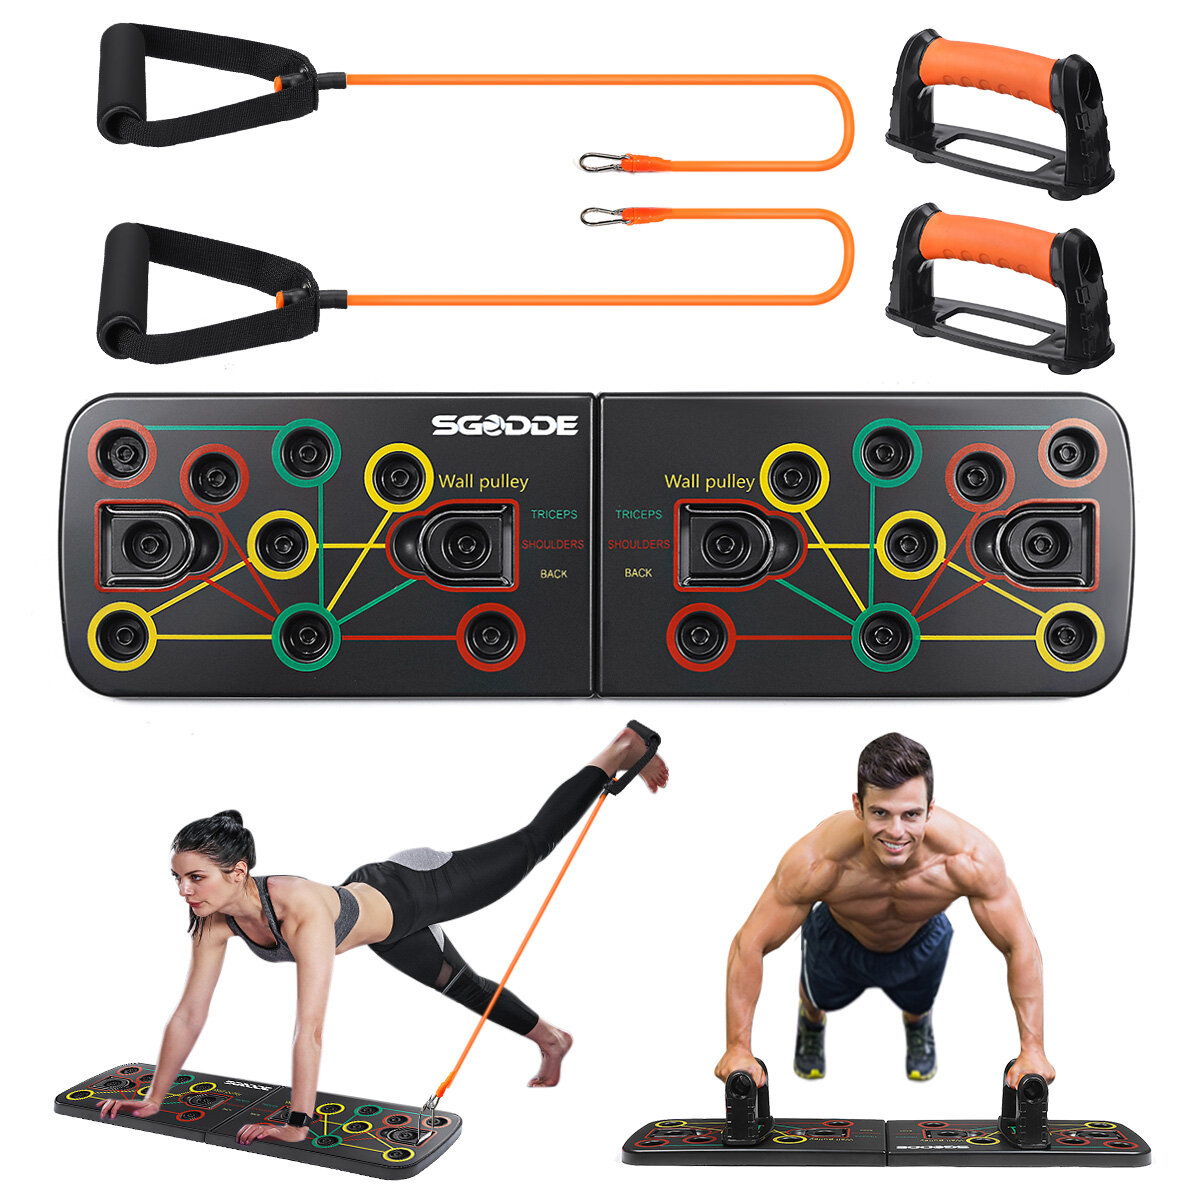 SGODDE 13 In1 Folding Push-up Rack Board With Handle&Resistance Band Fitness Workout Training Gym Exercise Pushup Stand